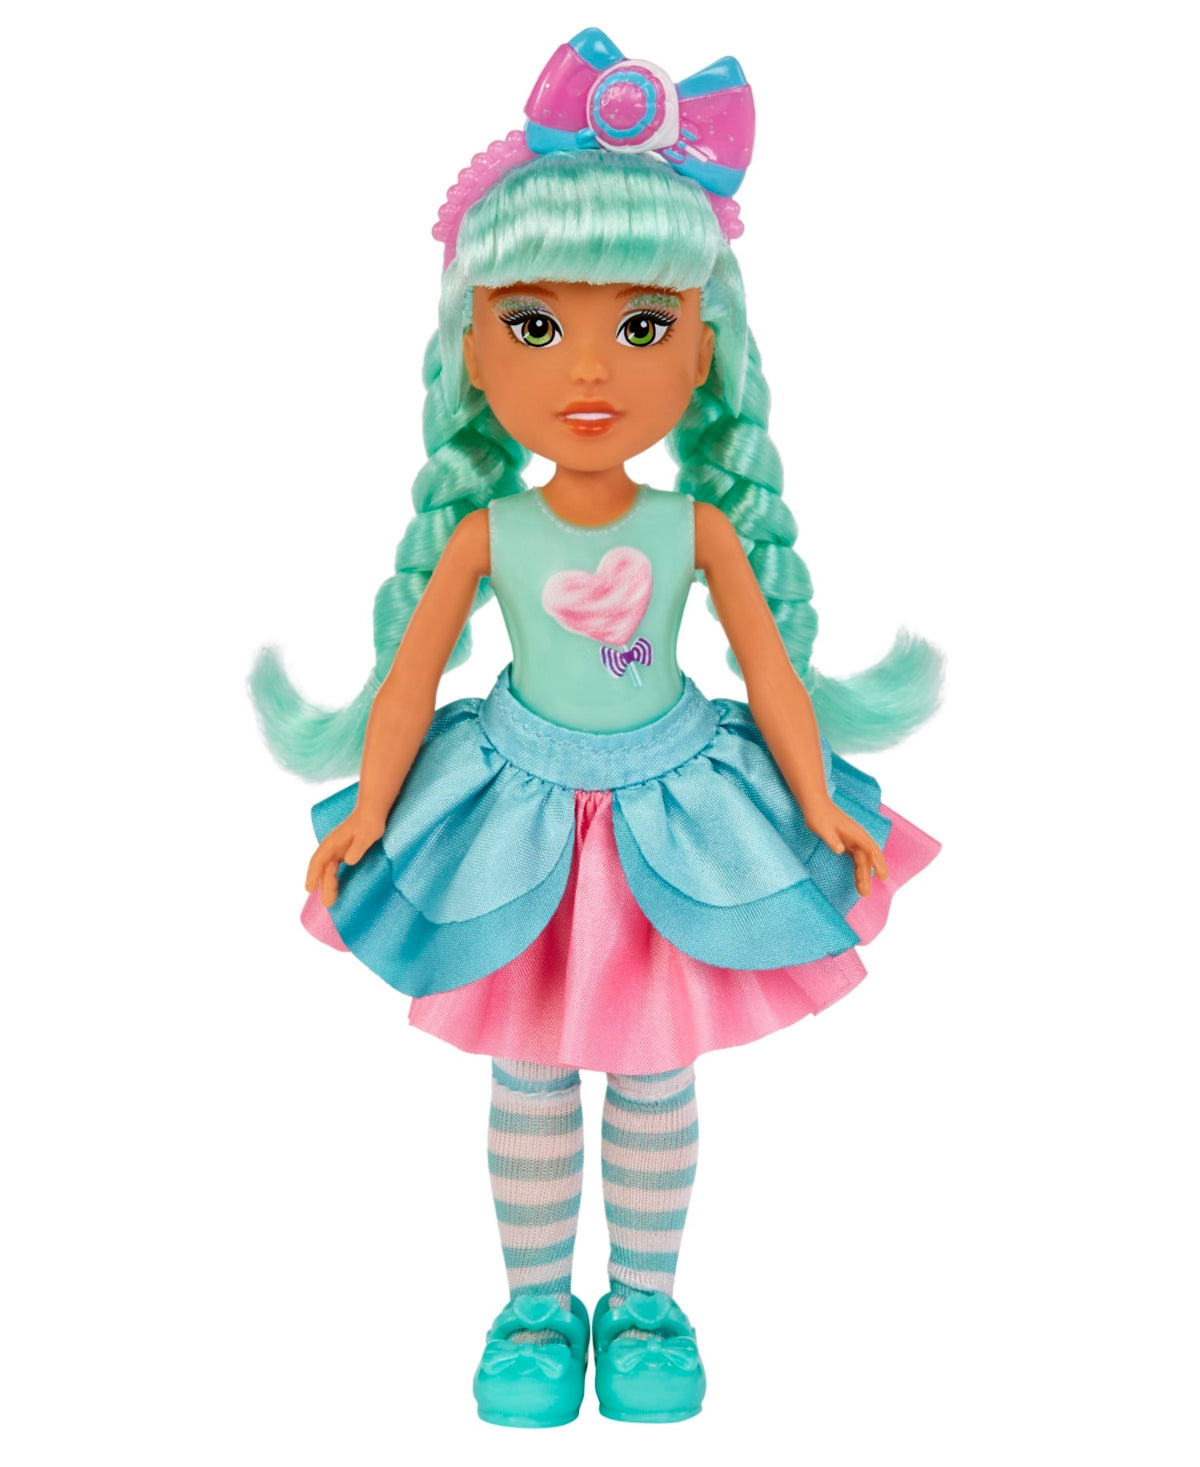 MGA Dream Bella Candy Little Princess - Cotton Candy Scented 6" Doll